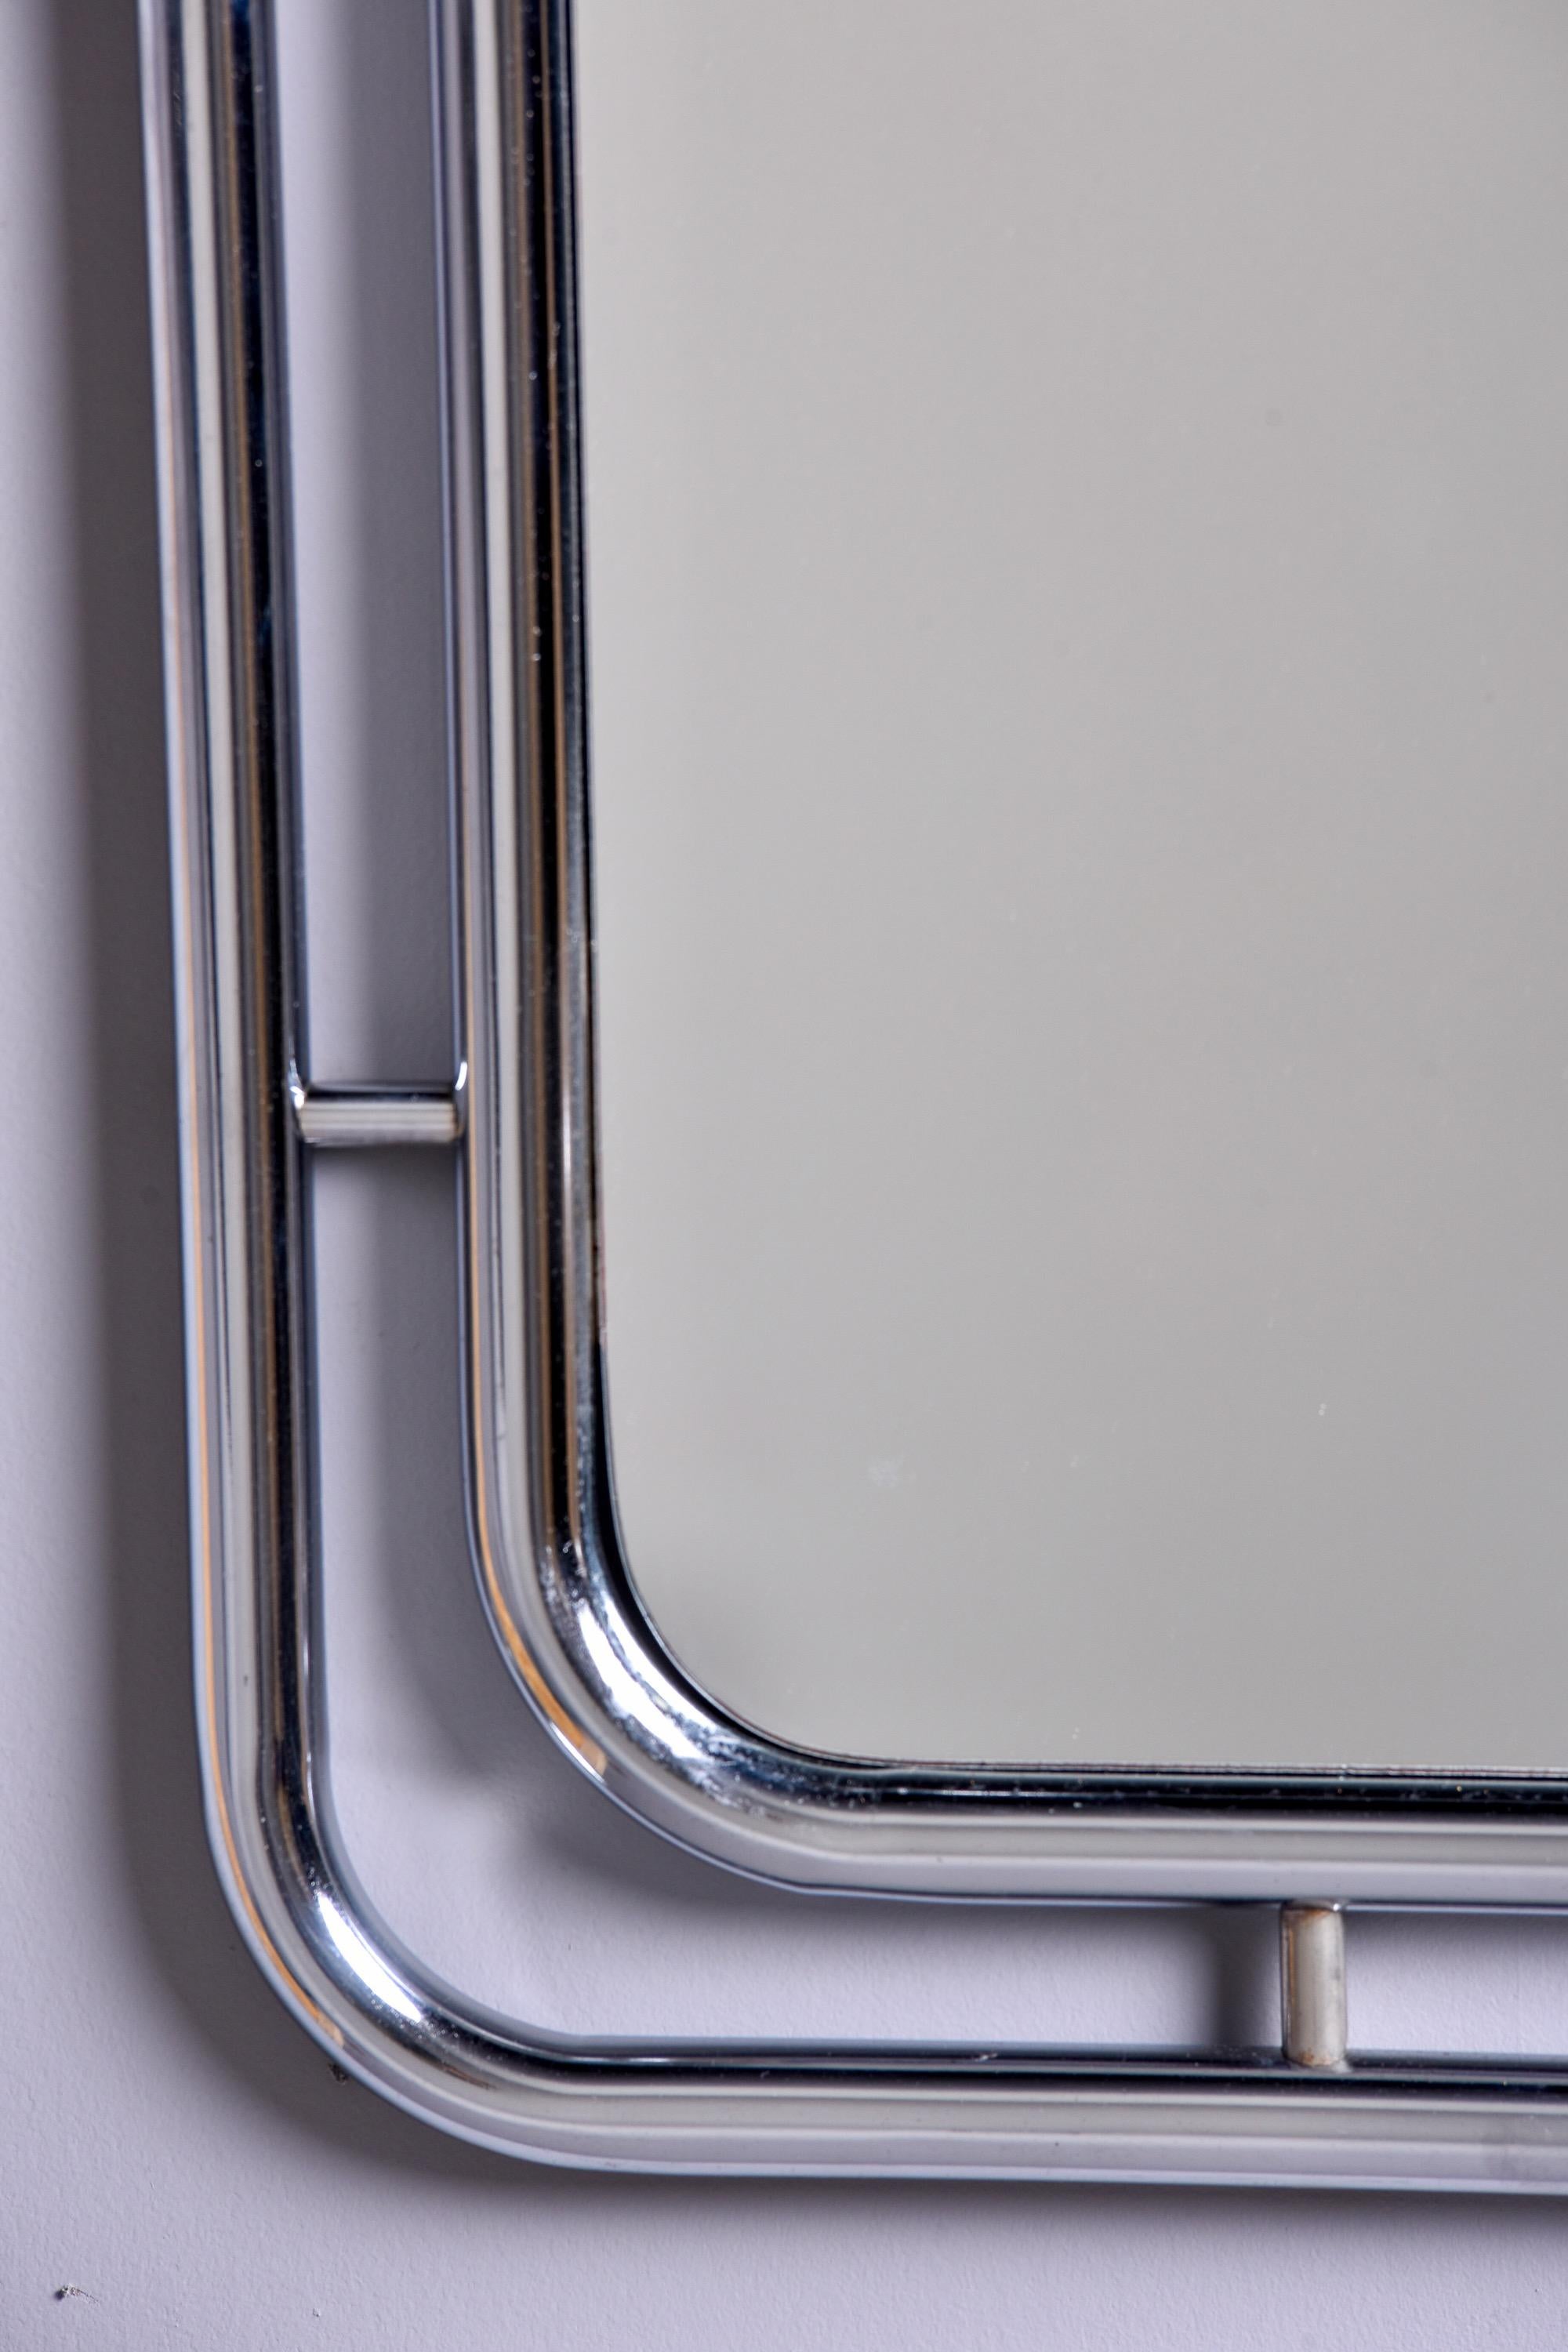 Italian Mid Century Chrome Trimmed Square Mirror Within Chrome Frame For Sale 6